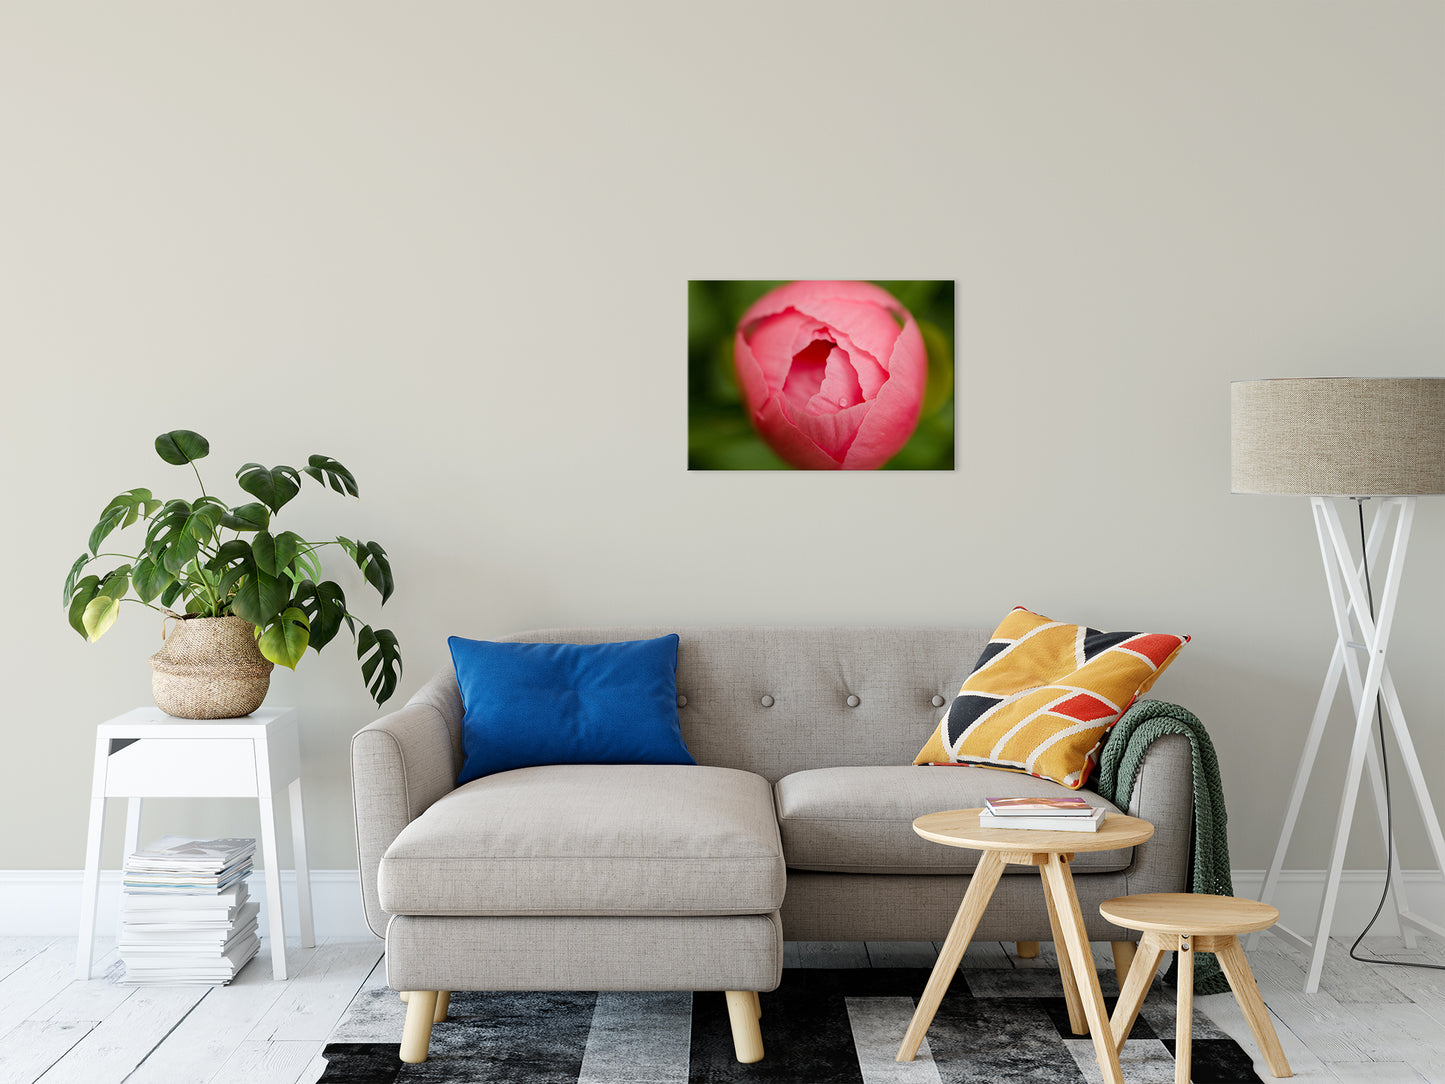 Peony Bud Nature / Floral Photo Fine Art Canvas Wall Art Prints 20" x 24" - PIPAFINEART